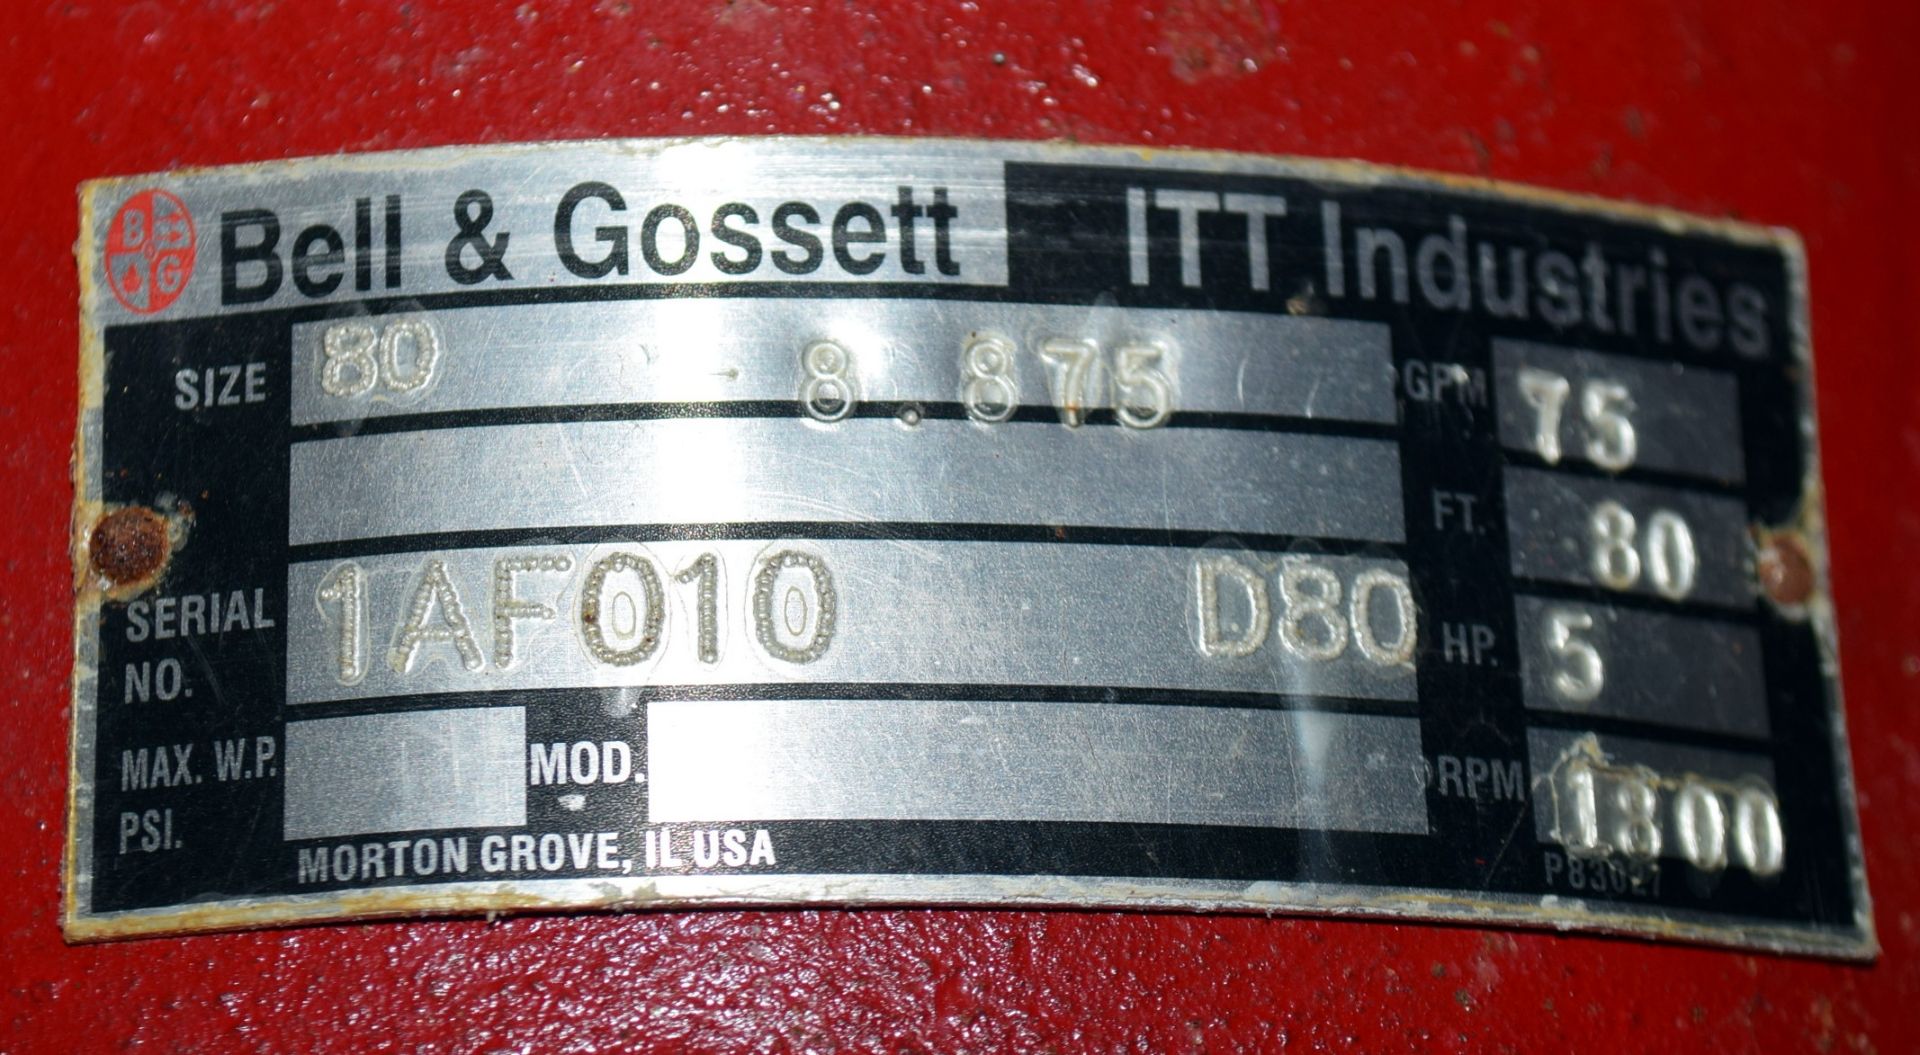 Bell & Gossett ITT Industries Carbon Steel Pump, Size 80. Rated 75 GPM at 80' head. Driven by a 5hp, - Image 4 of 4